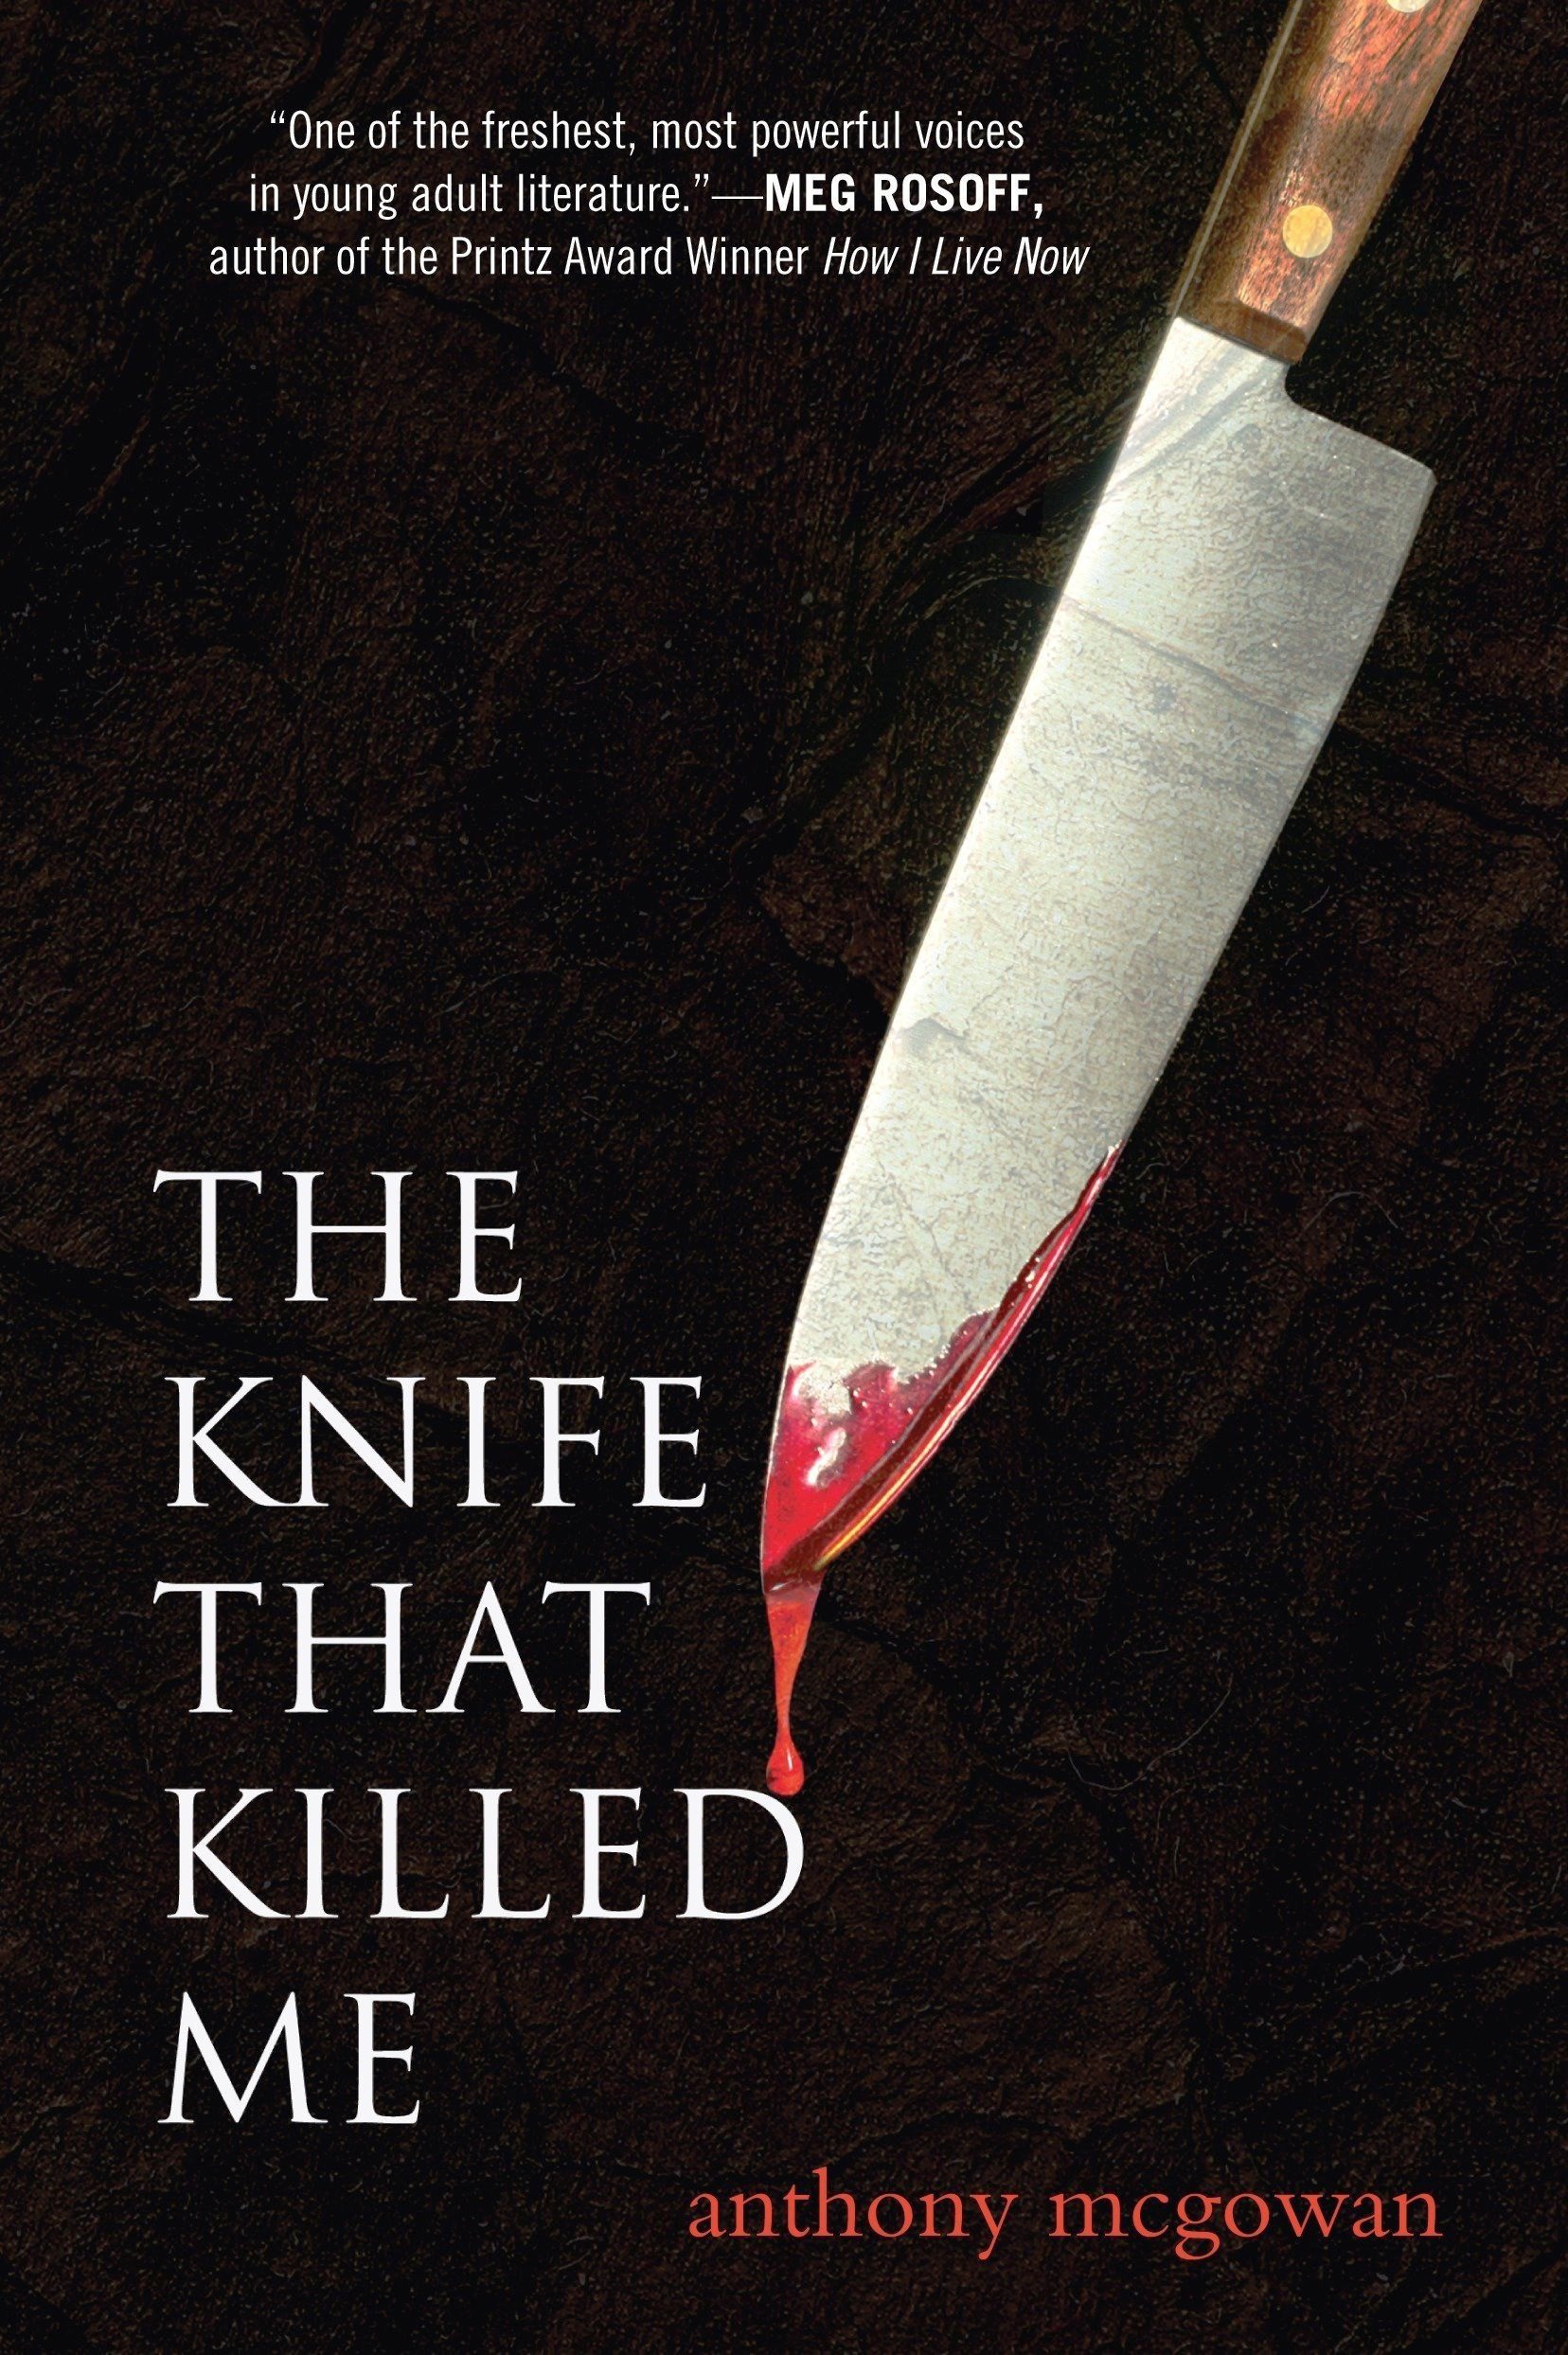 The Knife that Killed Me